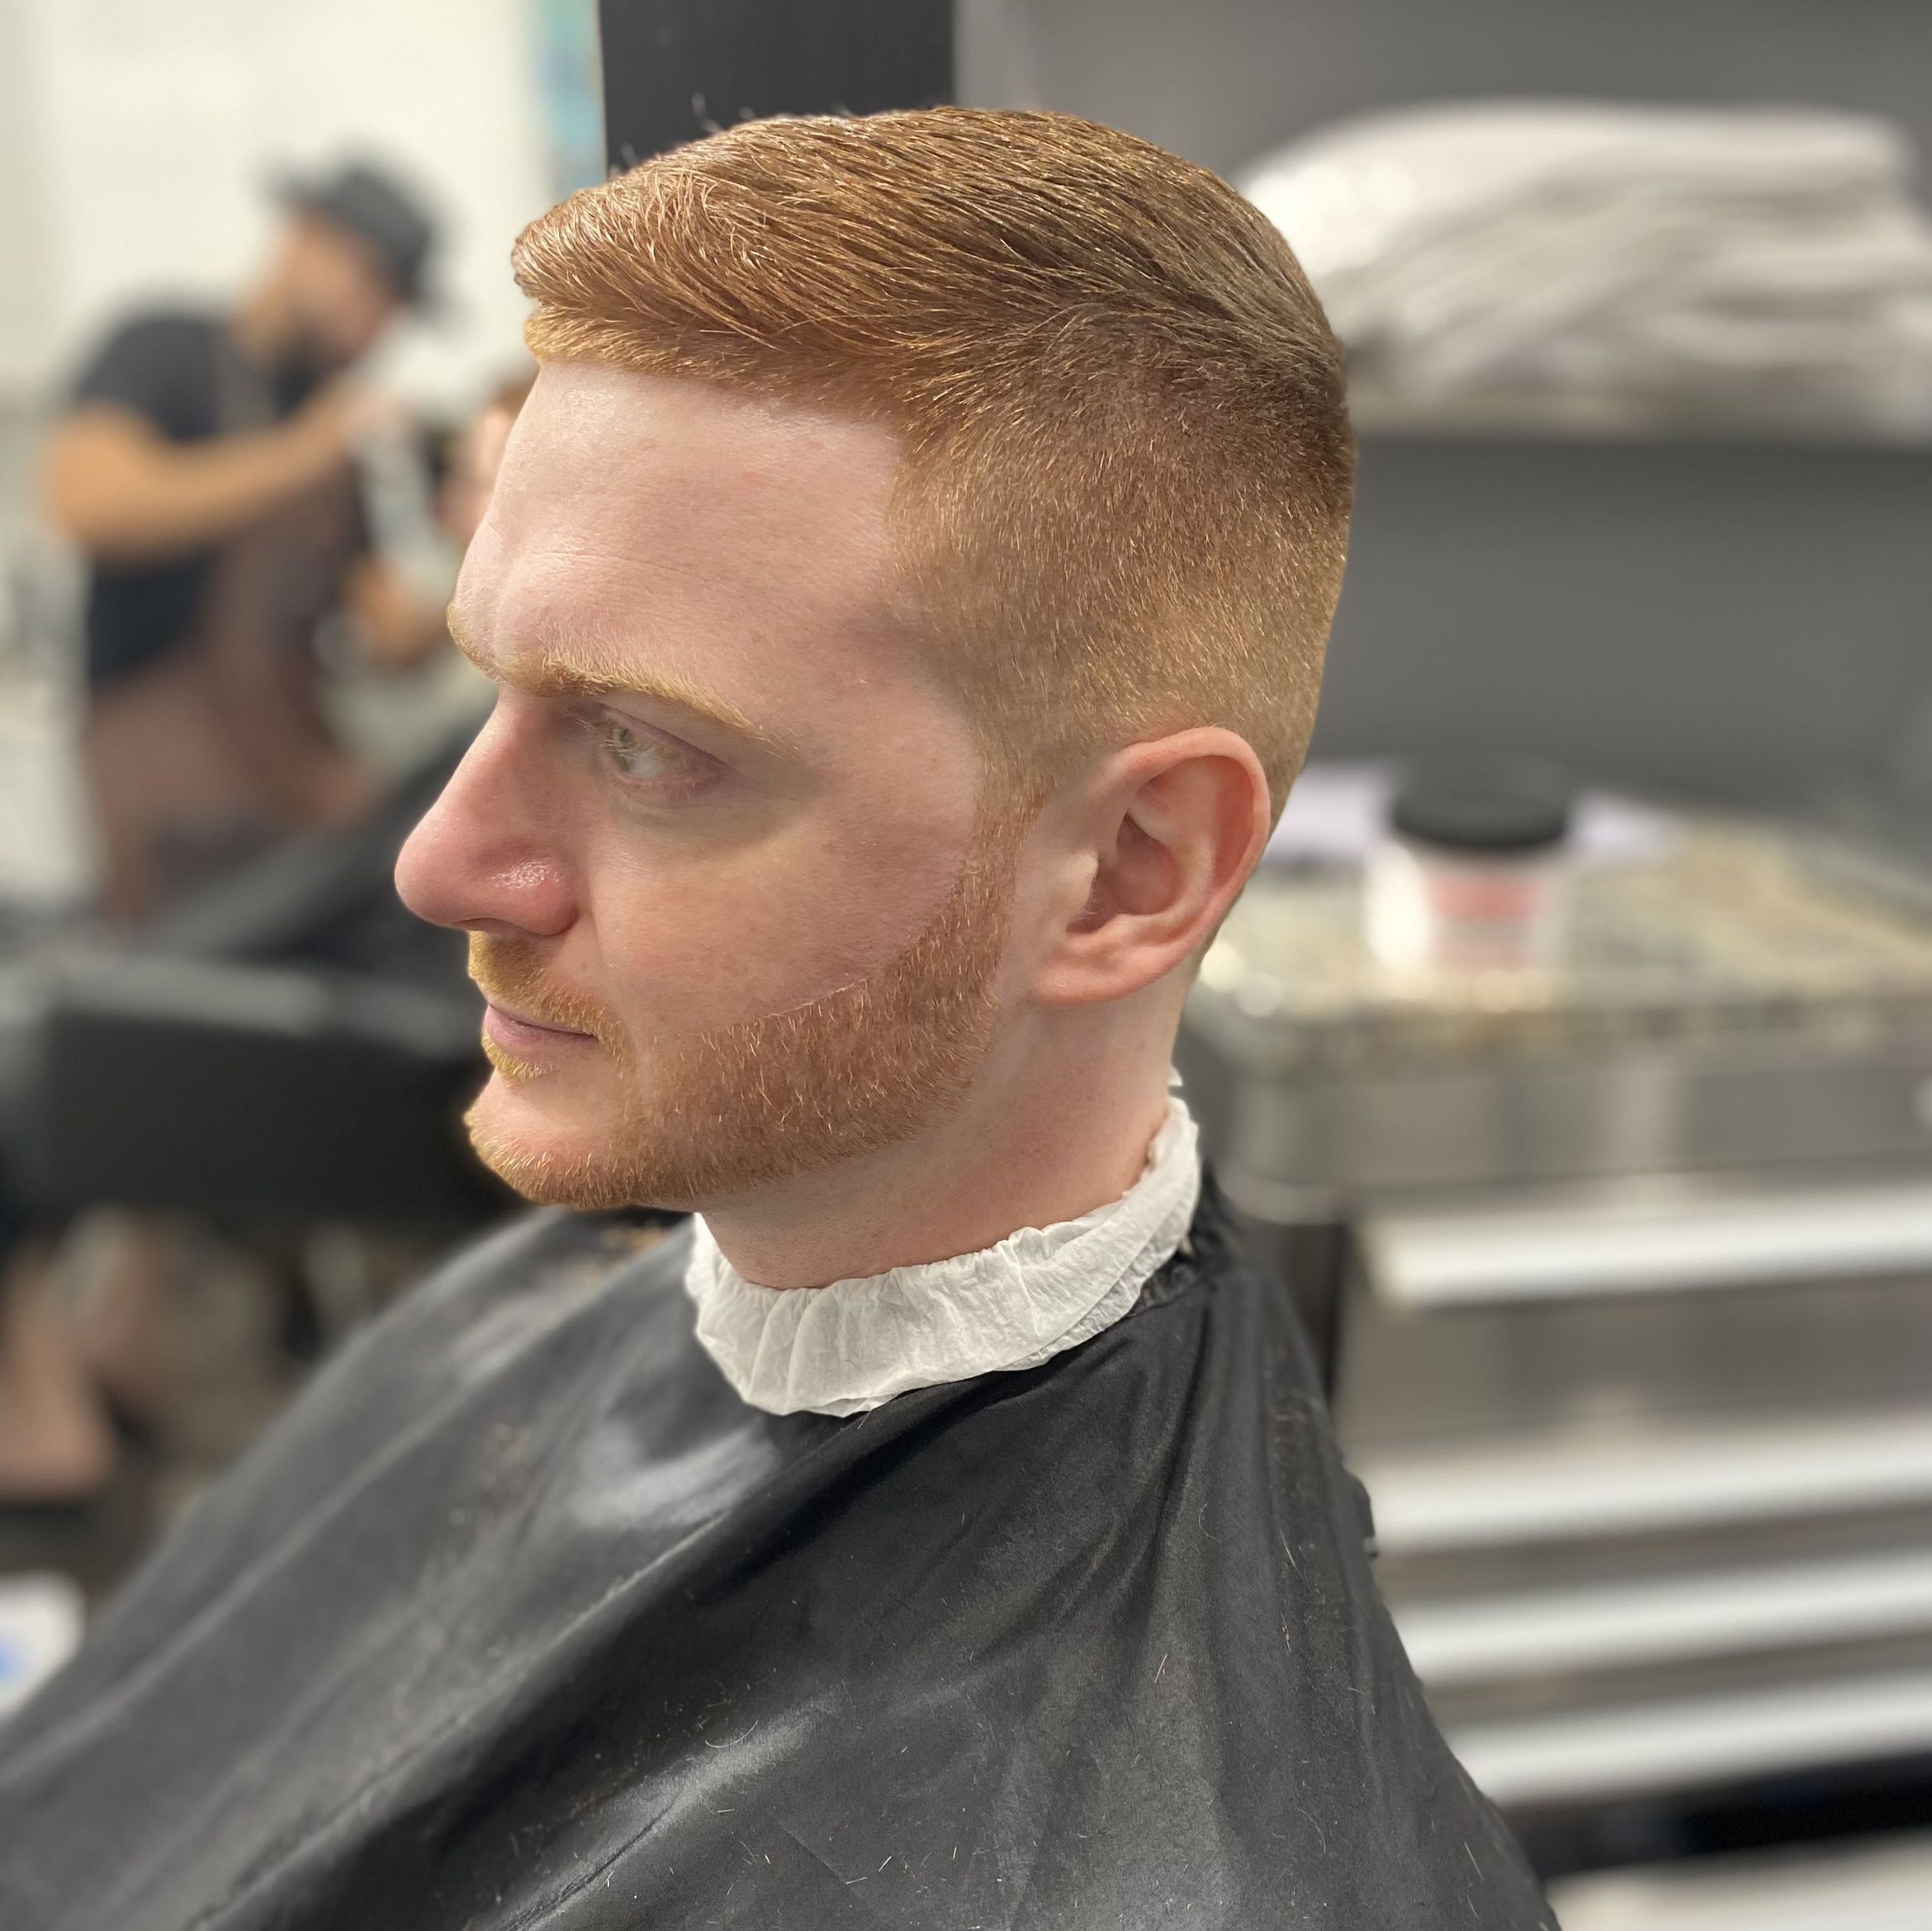 traditional Faded haircut( not a skin fade portfolio